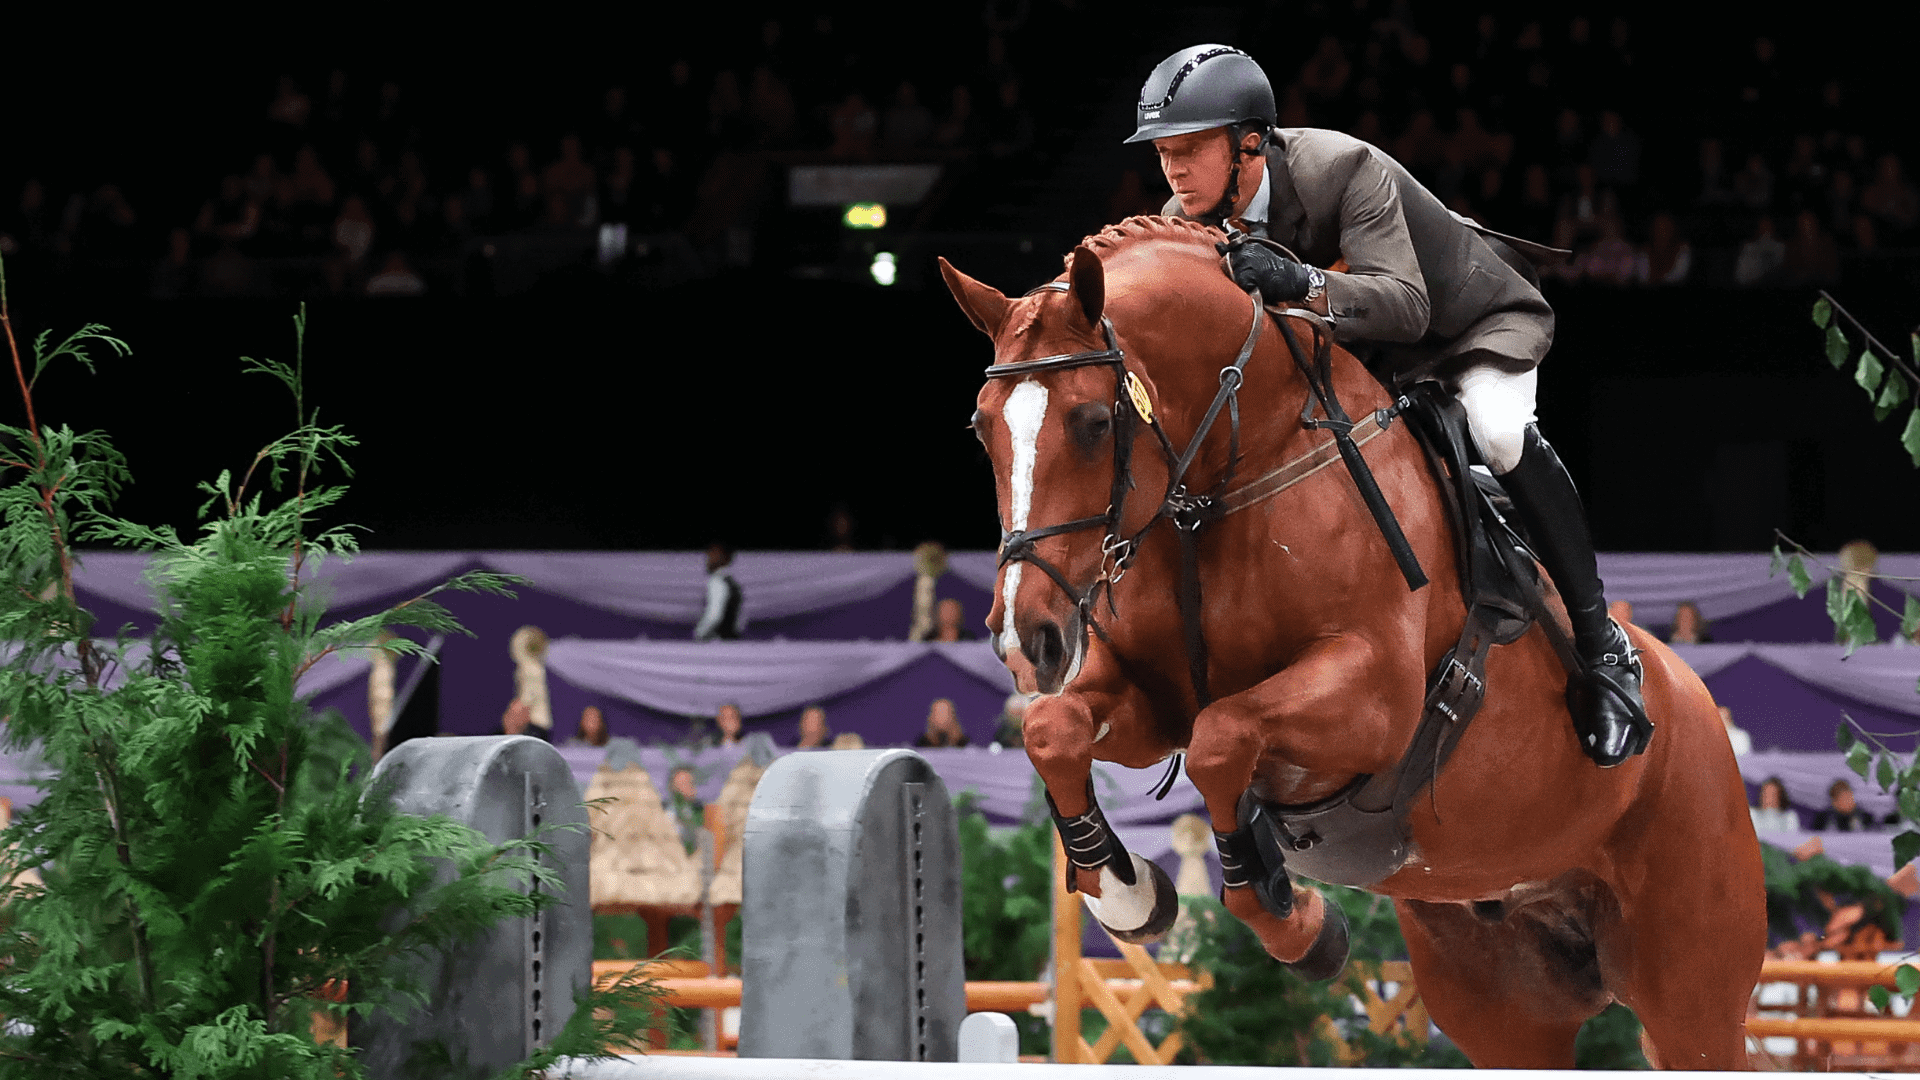 WATCH HORSE OF THE YEAR SHOW 2022 LIVE STREAM